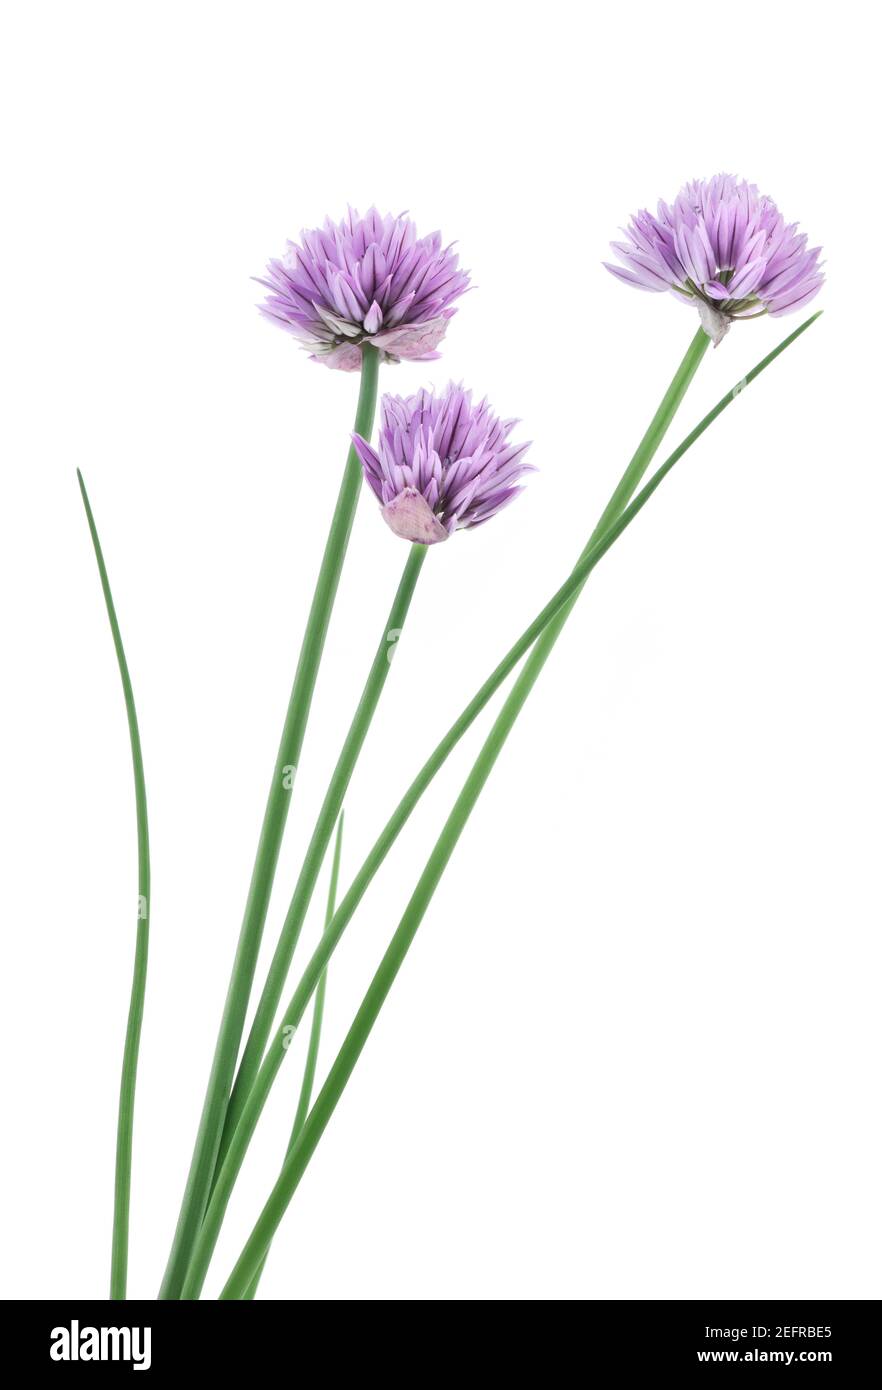 Artistic closeup of chives, Allium schoenoprasum plant, culinary herb blossoms, three purple flowers on green stalks. Side view isolated on white stud Stock Photo